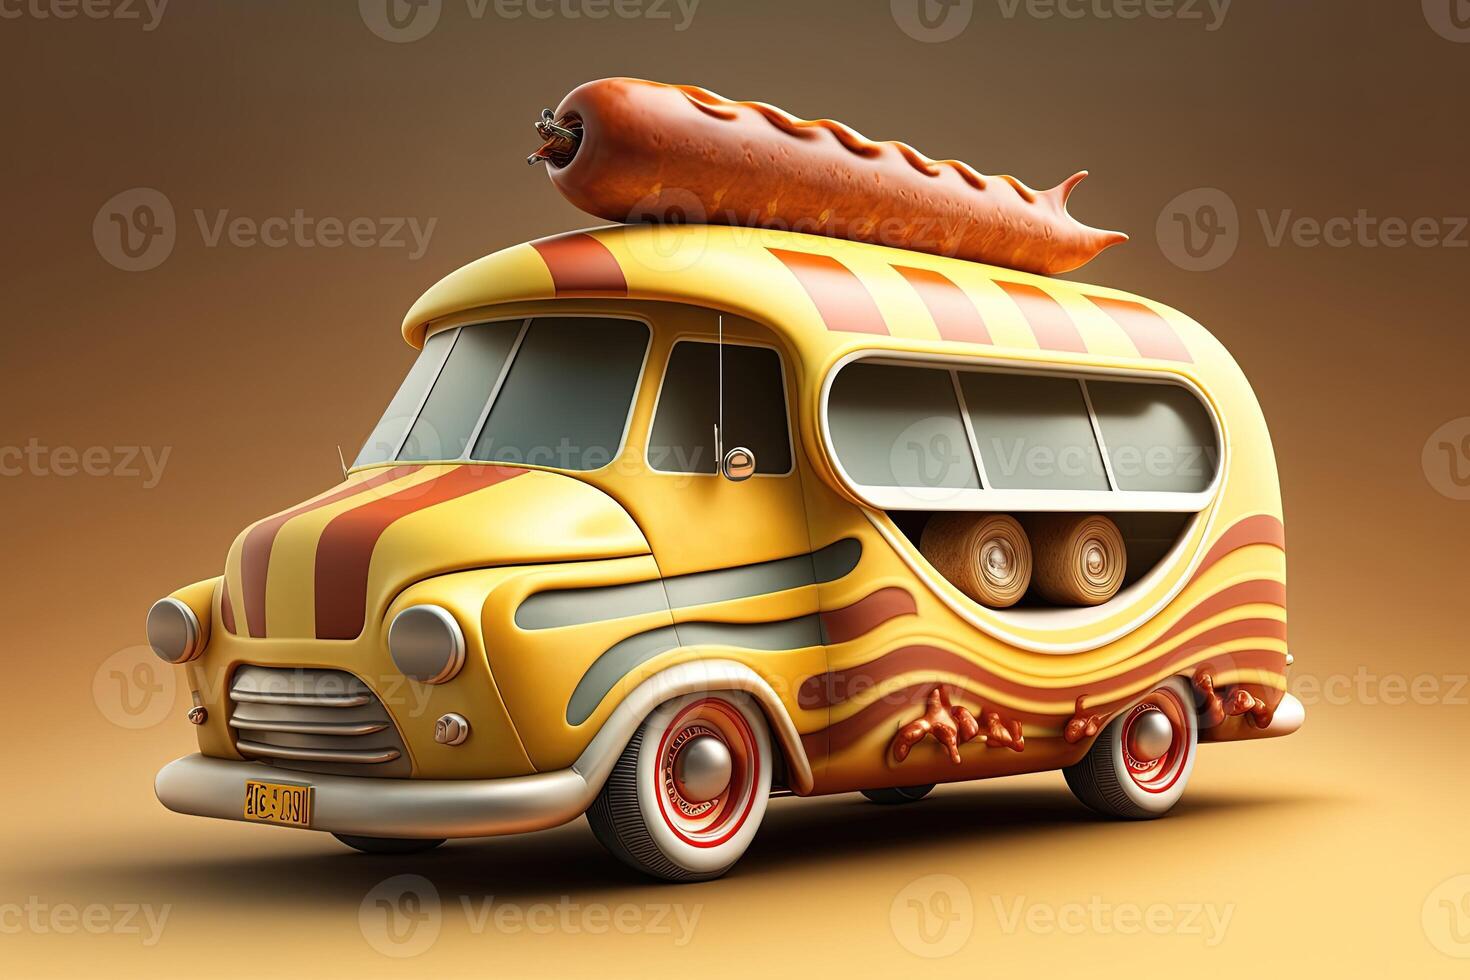 3D Hot Dog Delivery. Fast food hot dog car. Mascot hot dog car design. Logotype for restaurant or cafe. Street food festival symbol with hot dog in cartoon style. photo